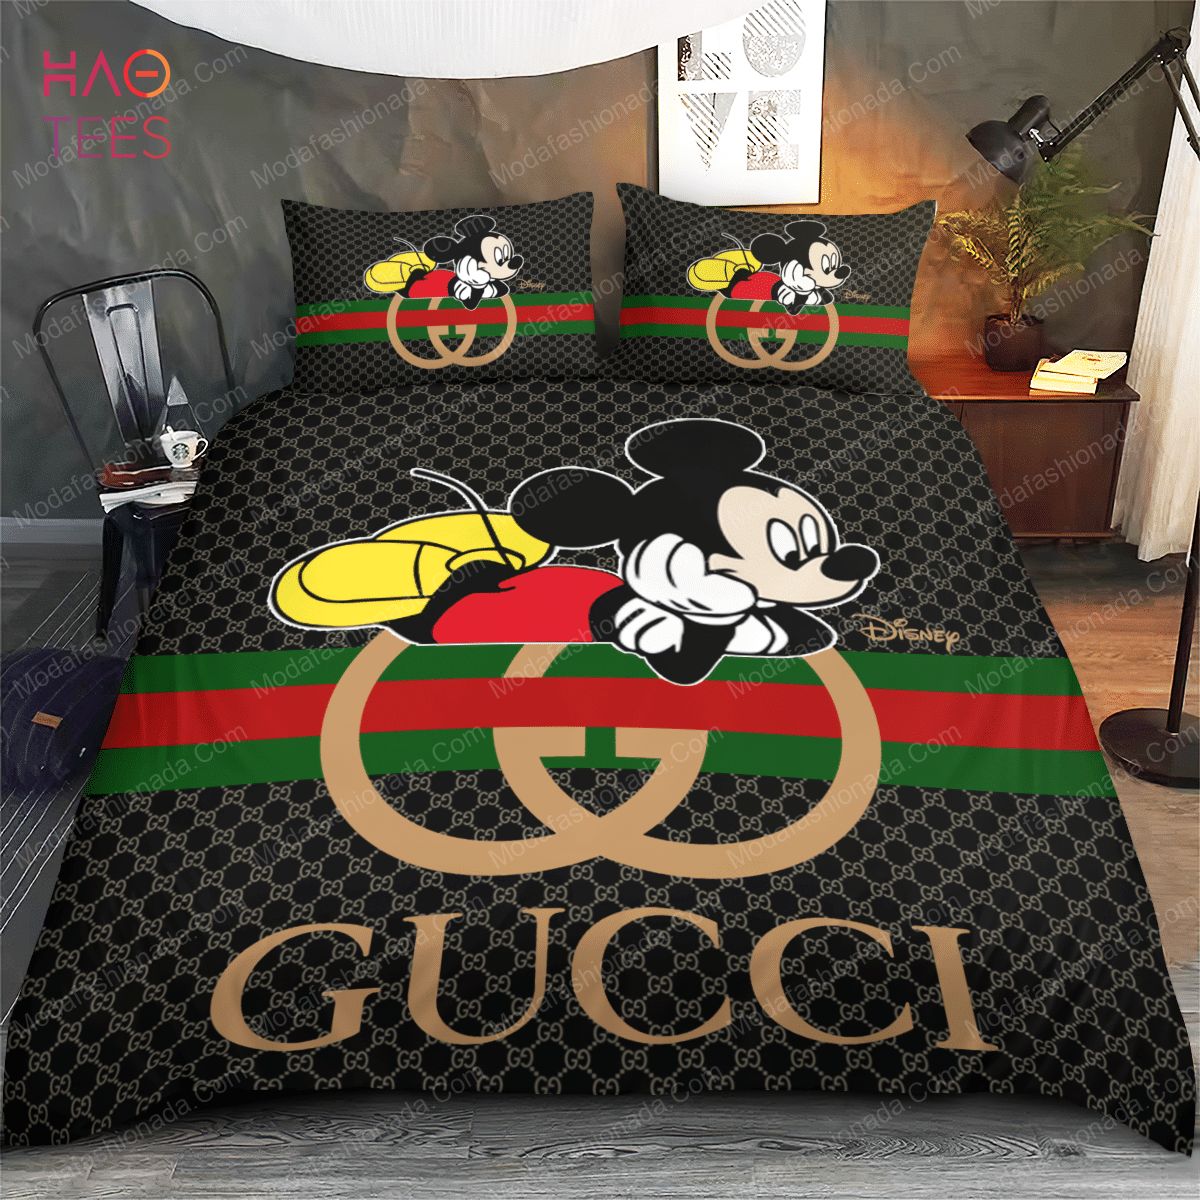 Personalized Gucci Mickey Mouse bathroom shower curtain set - LIMITED  EDITION